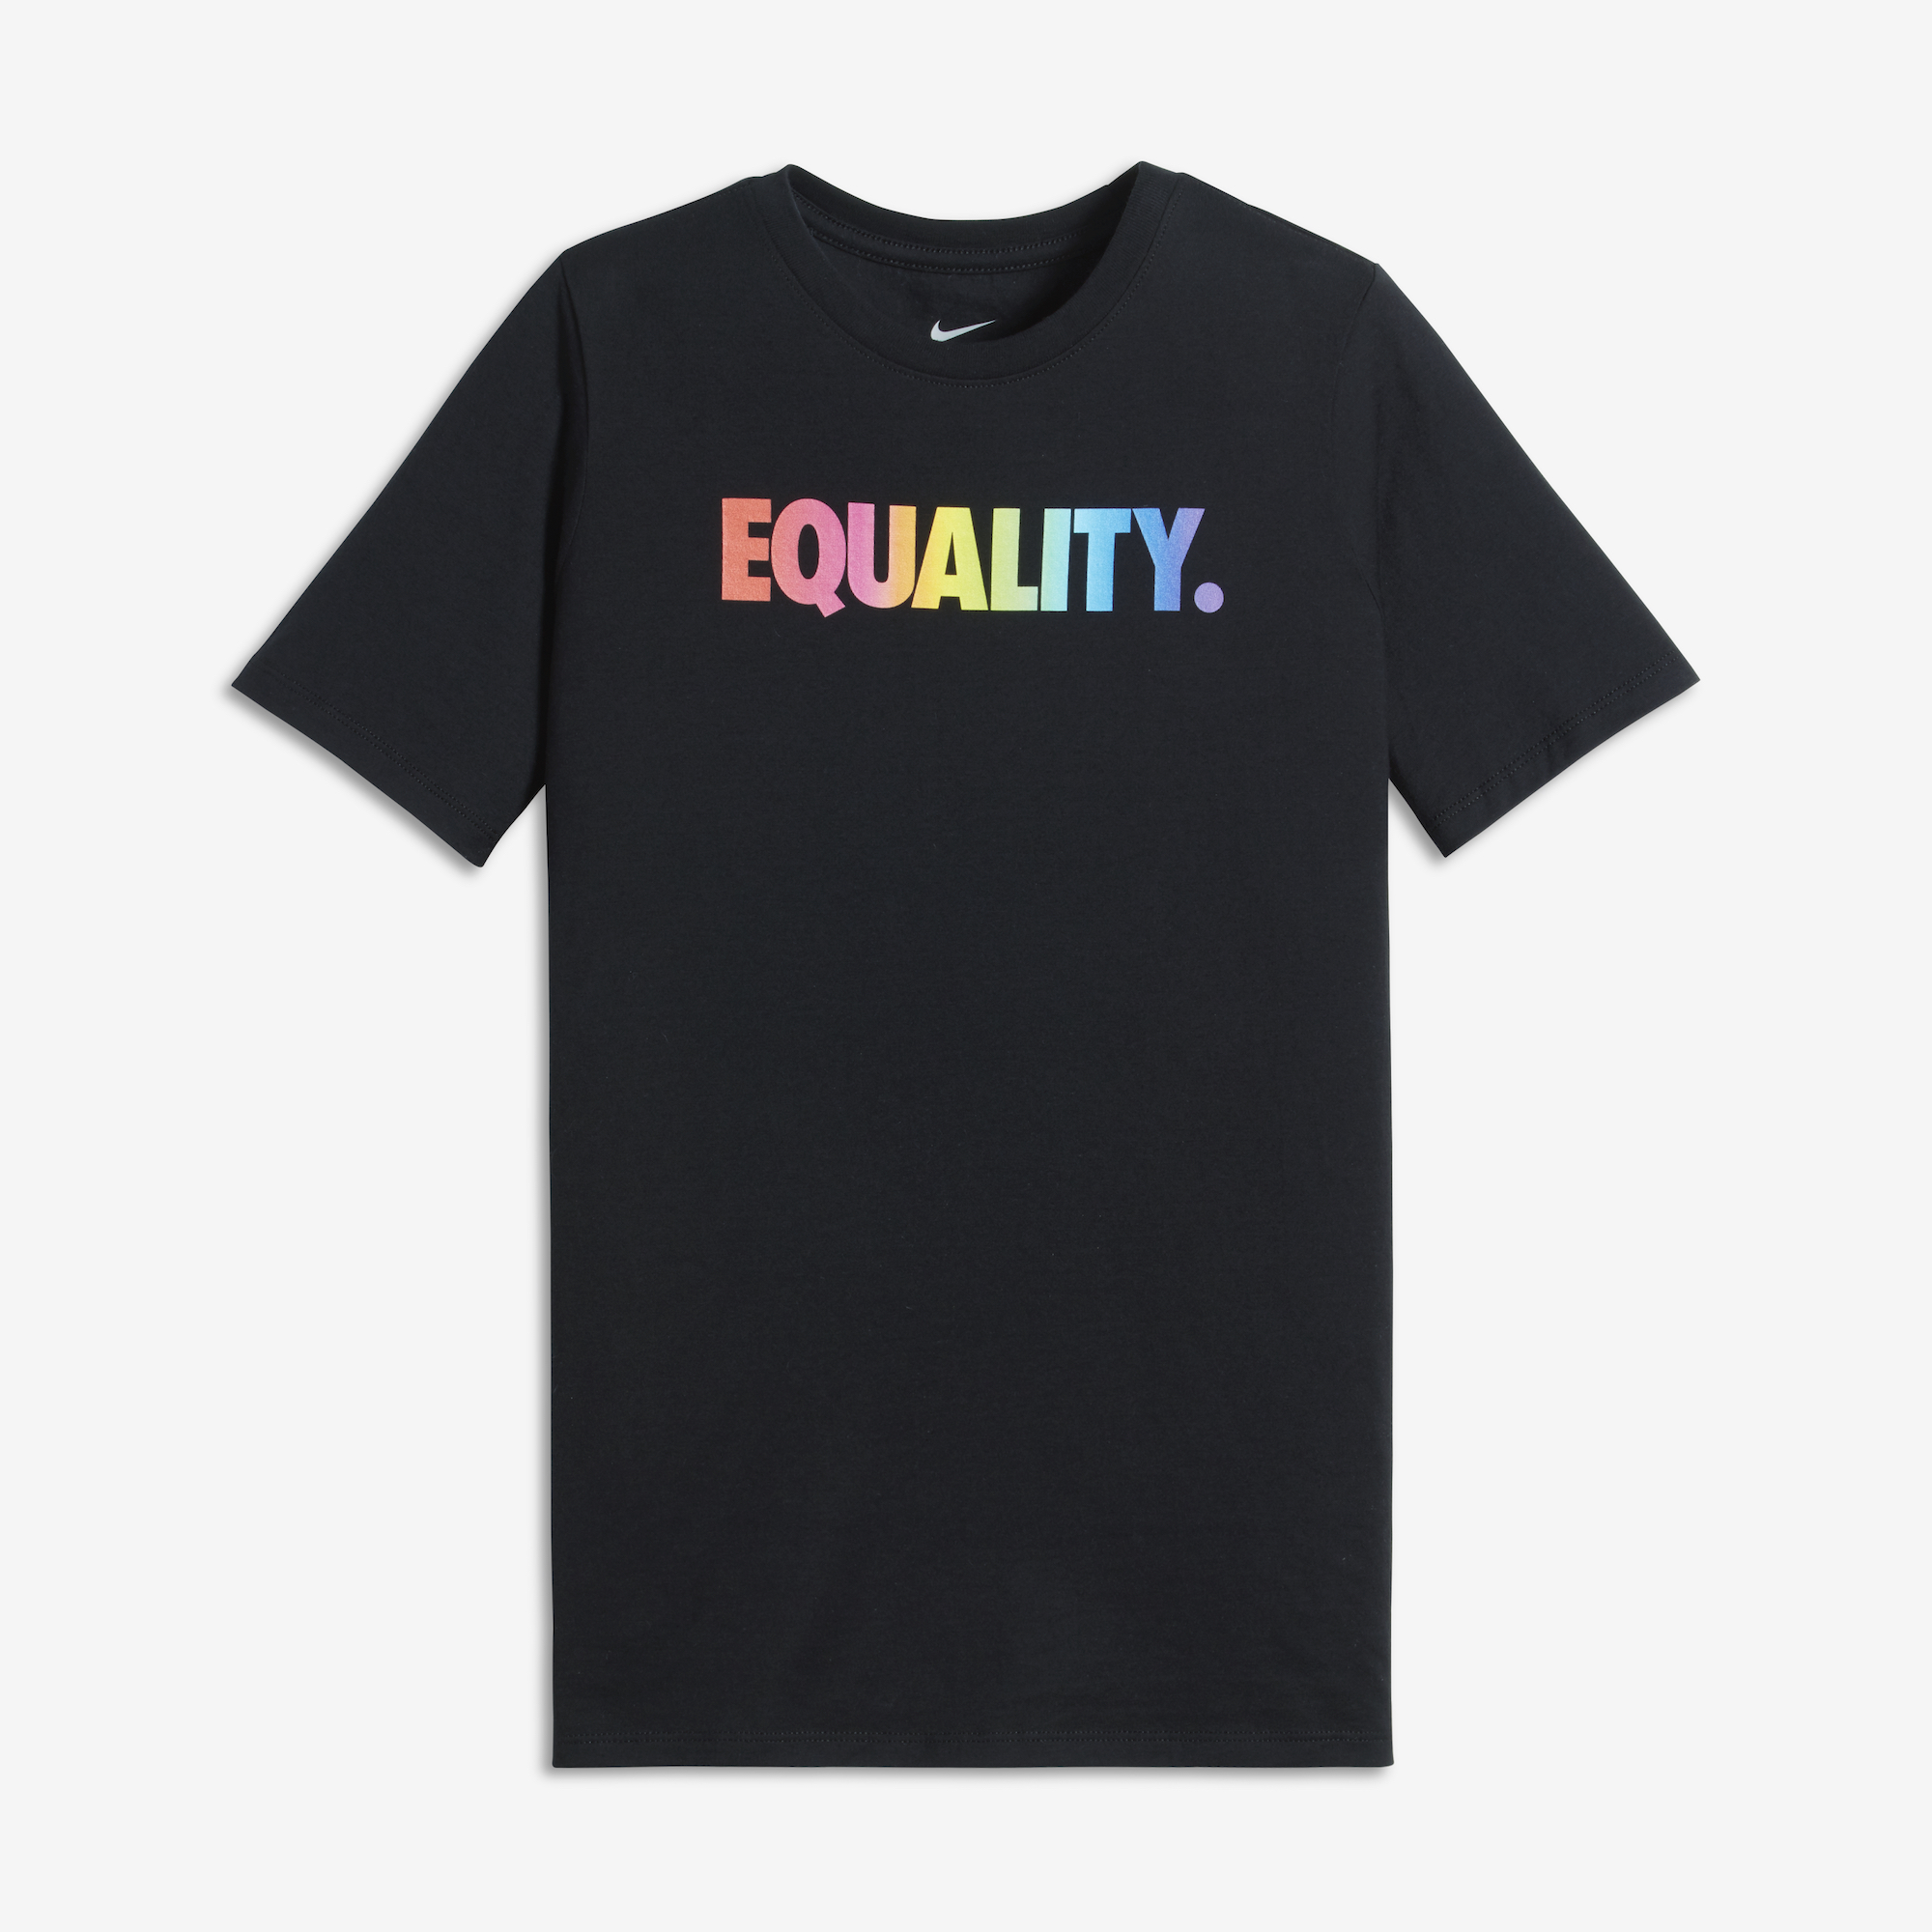 nike BETRUE 2017 collection equality